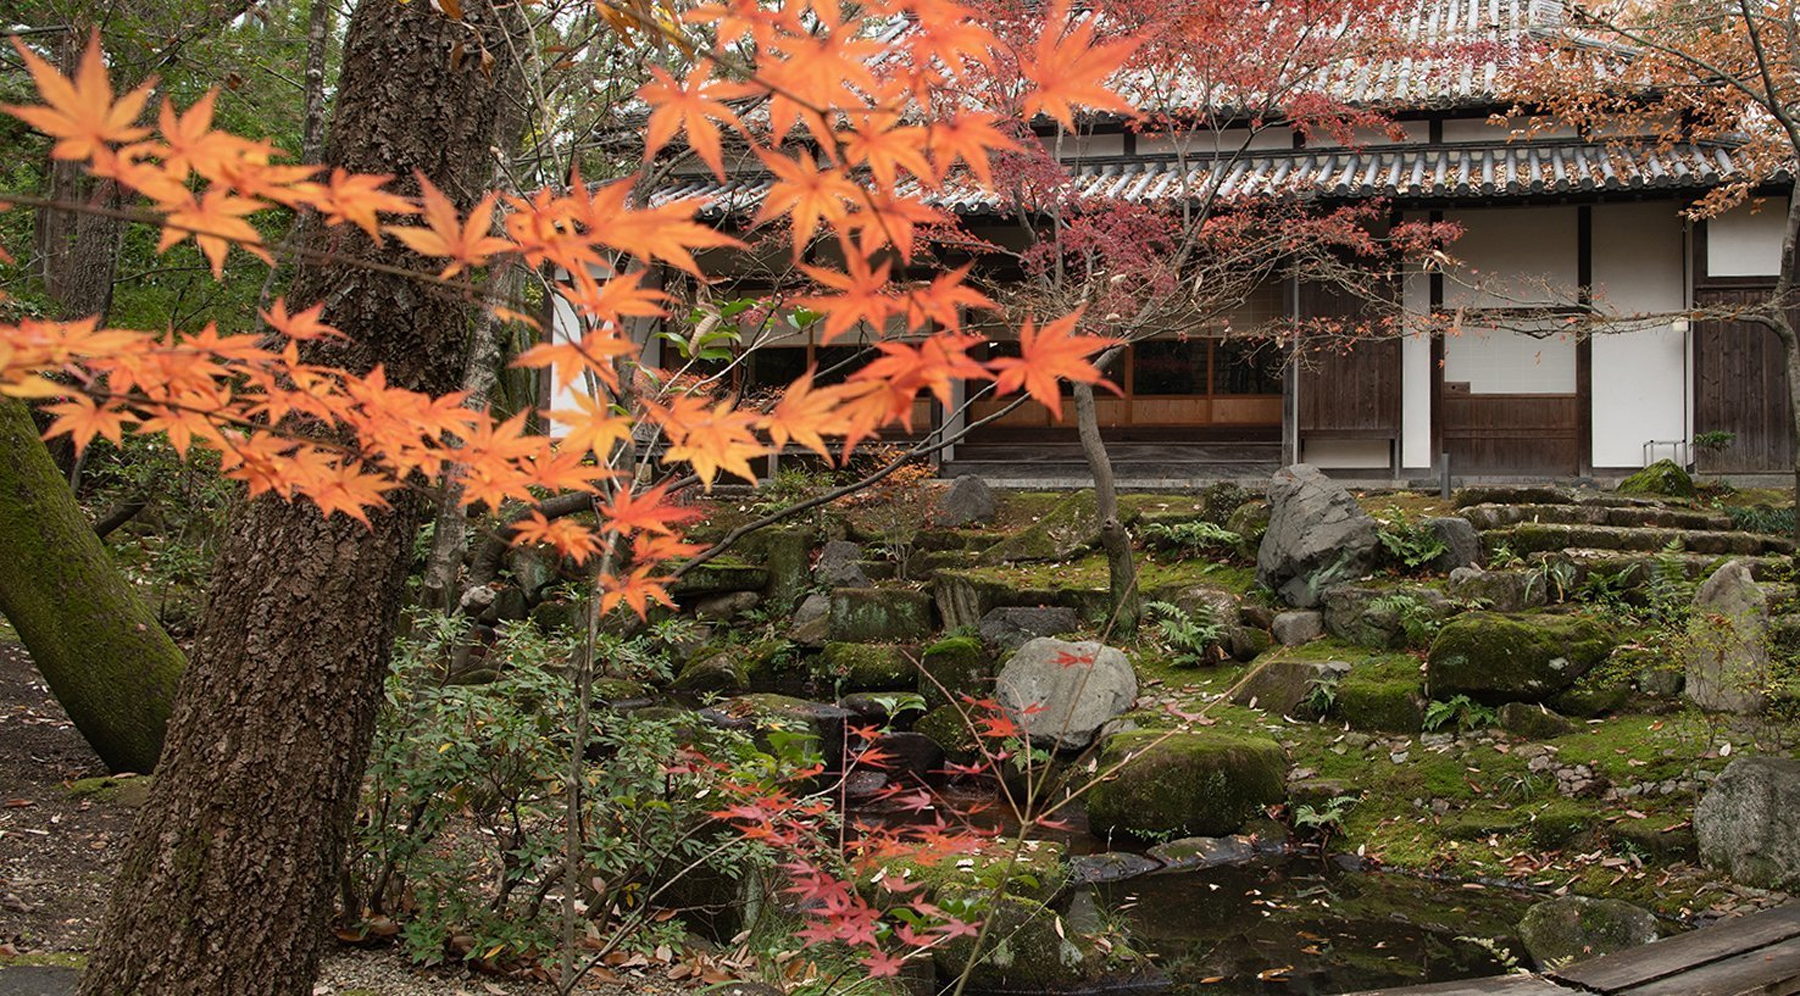 Japanese-style house with rock garden and maple trees in the fall